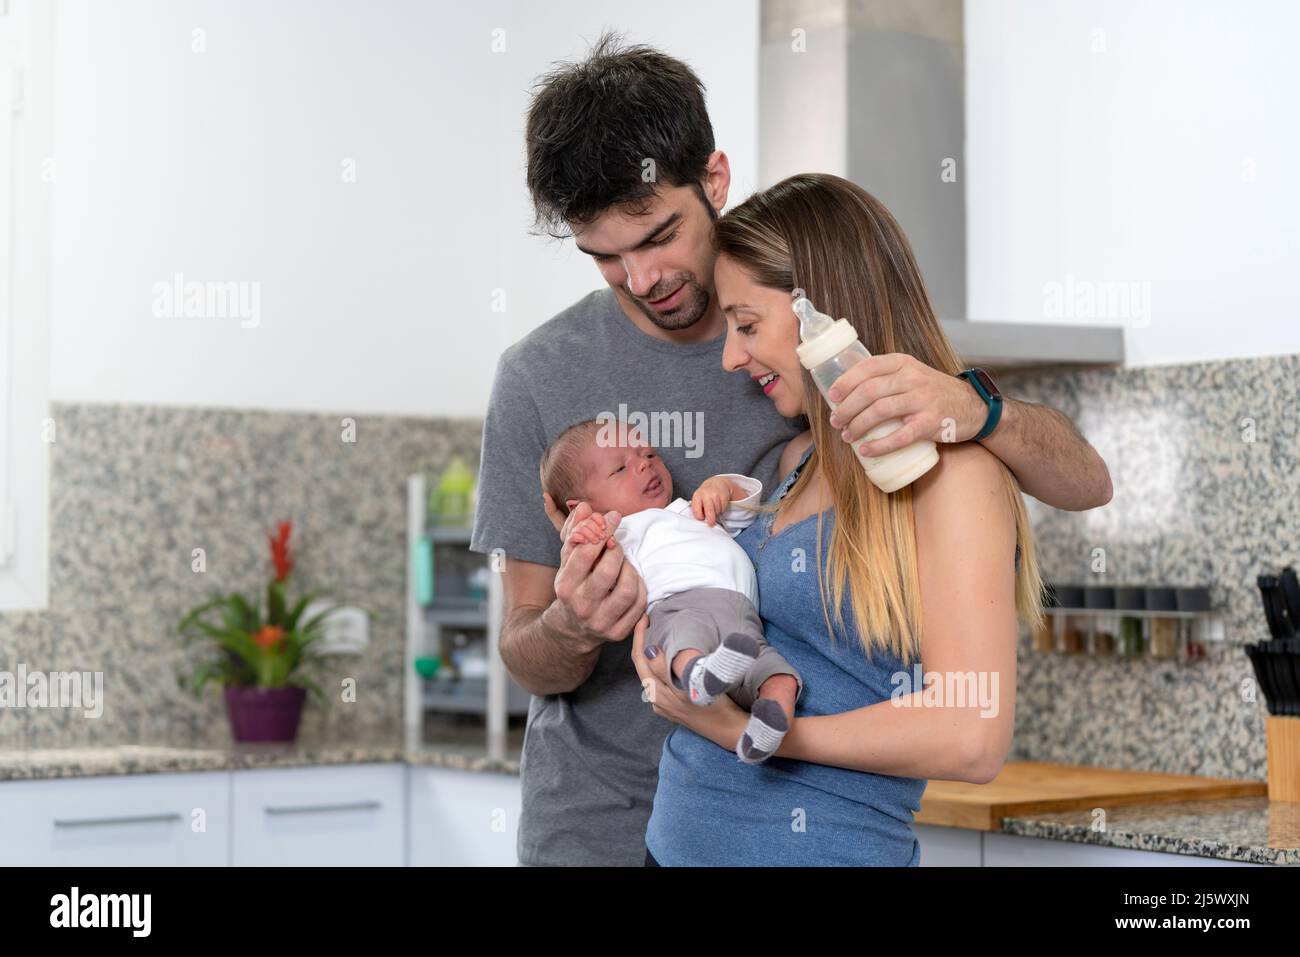 mother and father bottle feeding their newborn baby in the kitchen Stock Photo